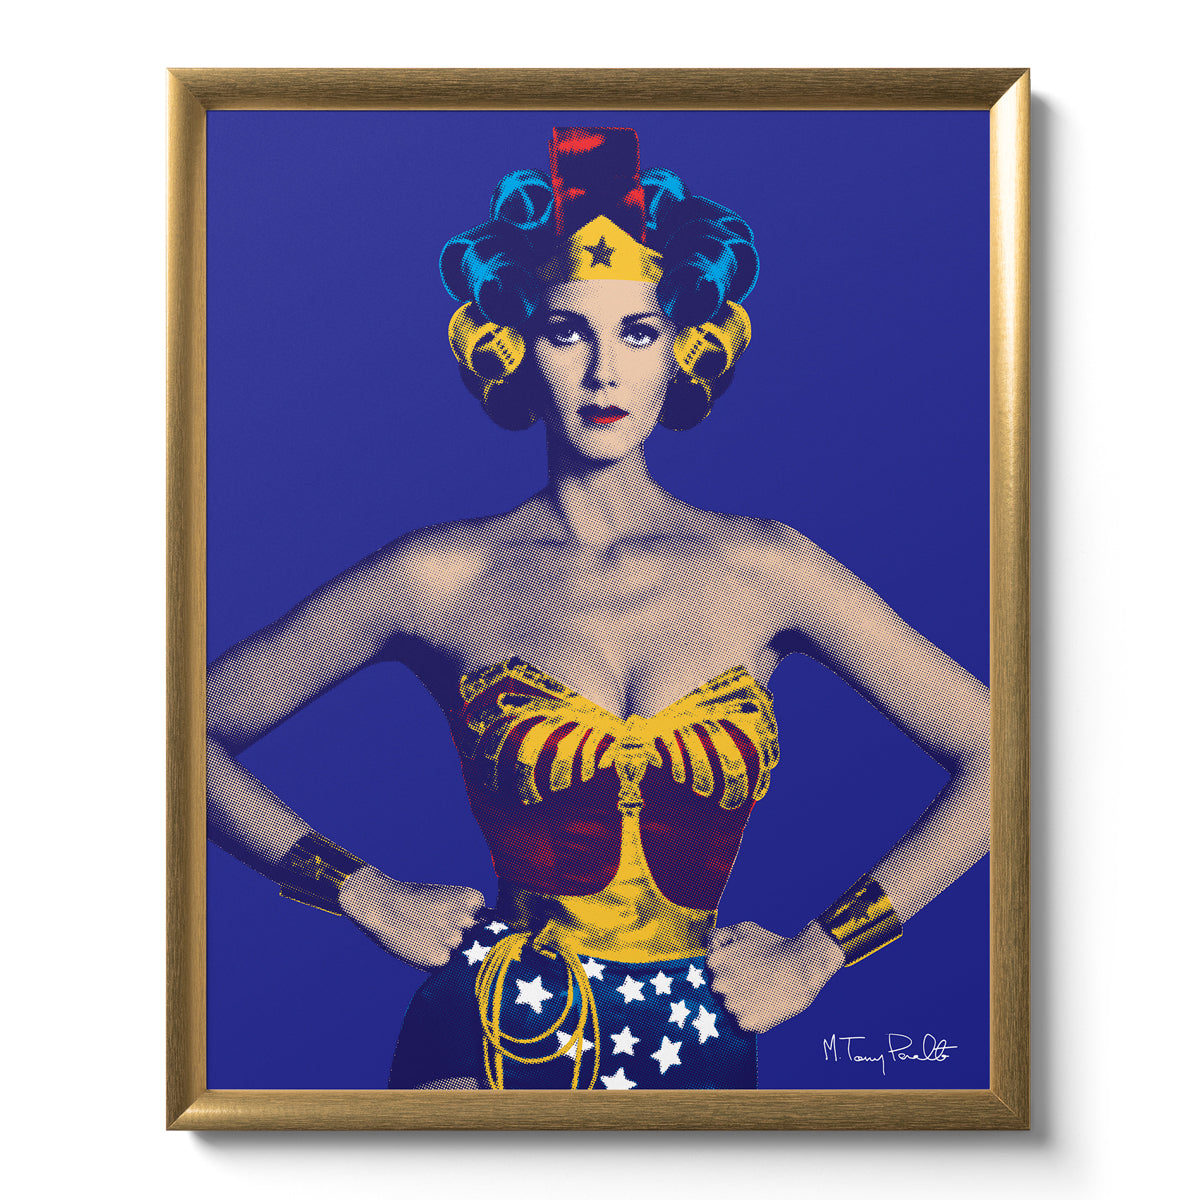 – Peralta ROLOS WOMAN (COBALT) CON 16x20 WONDER Project POSTER